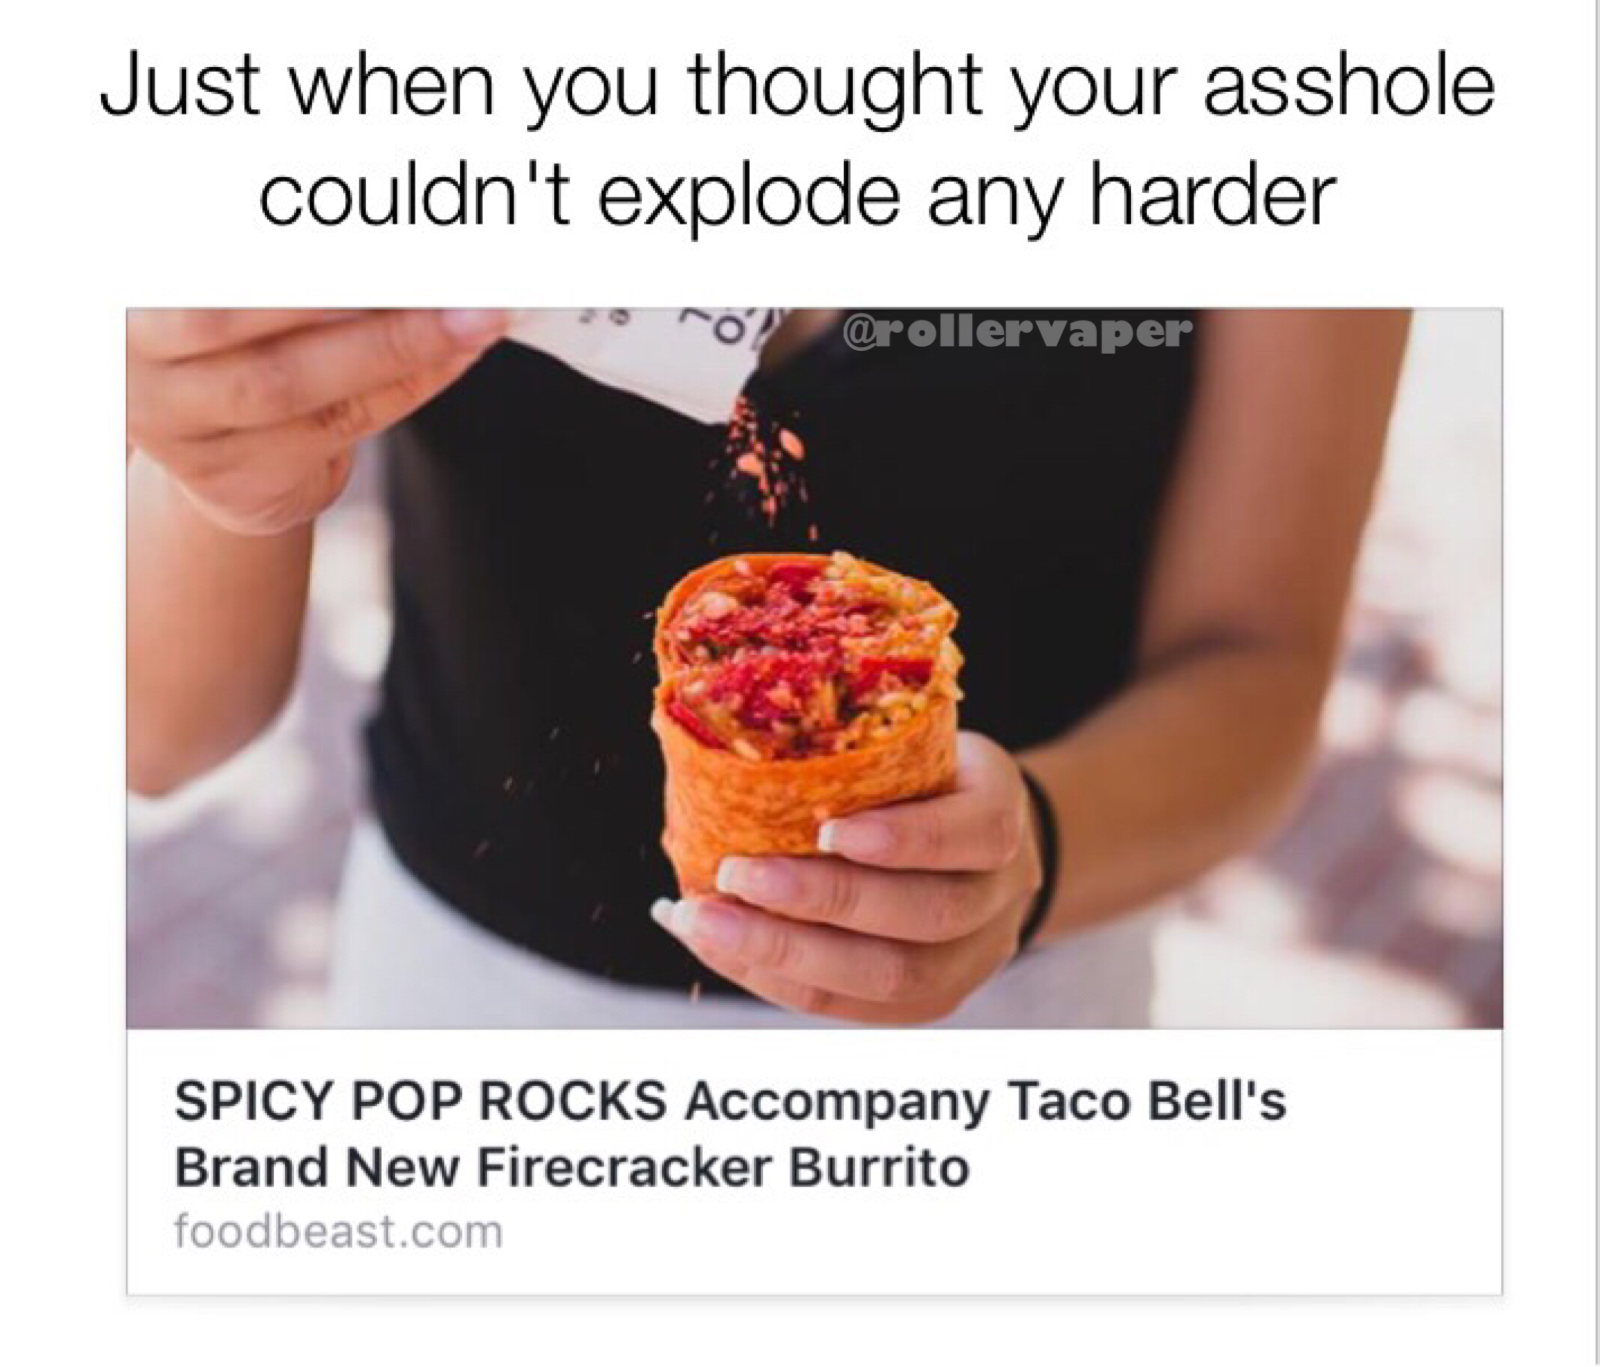 memes - nail - Just when you thought your asshole couldn't explode any harder Co Spicy Pop Rocks Accompany Taco Bell's Brand New Firecracker Burrito foodbeast.com